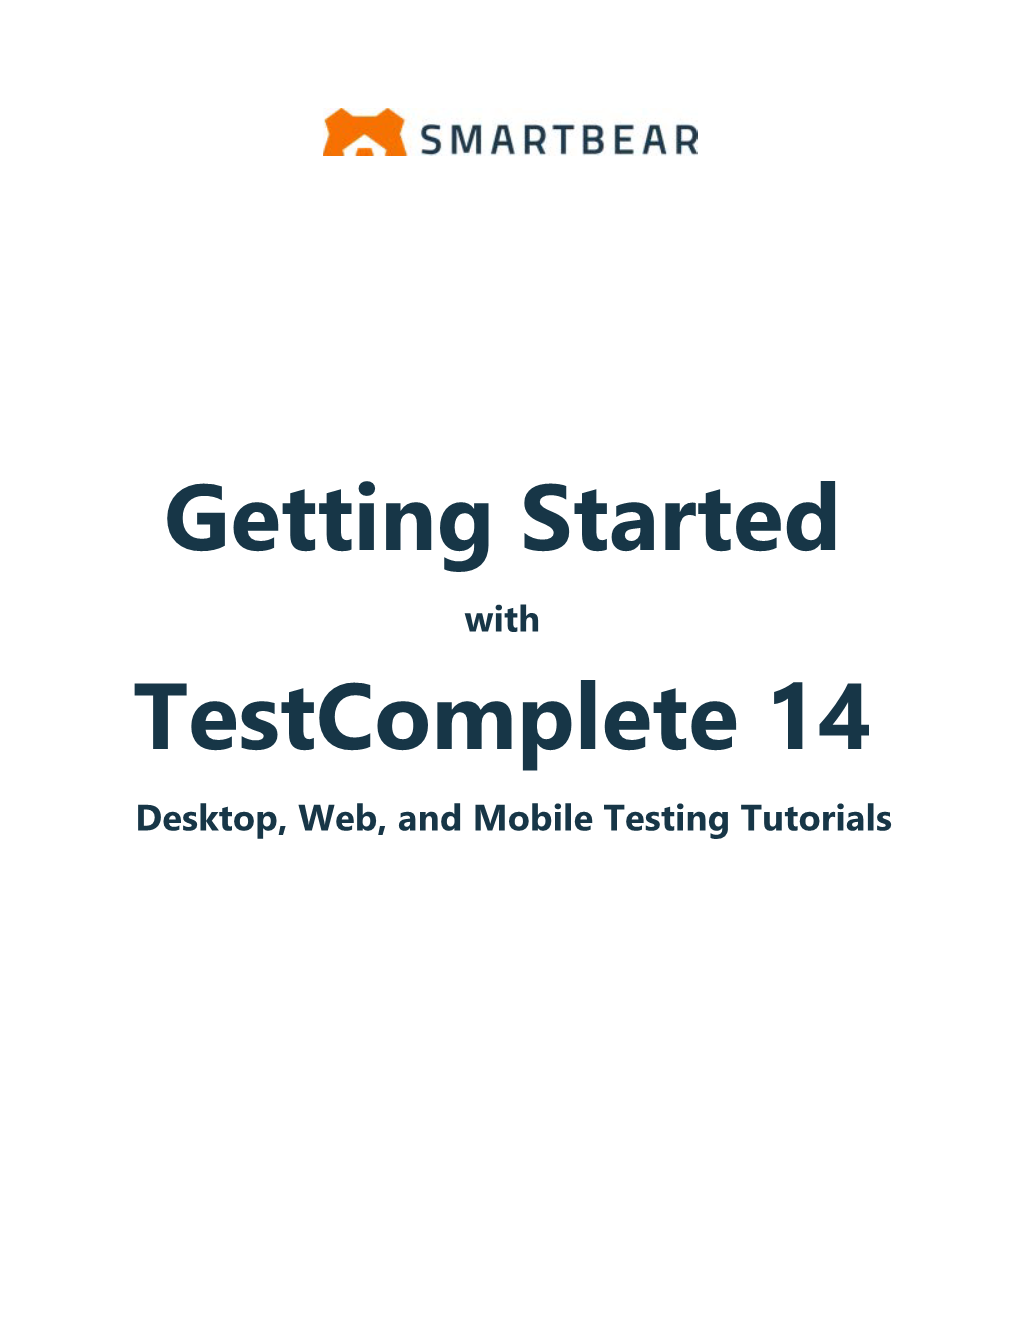 Getting Started with Testcomplete 14 Desktop, Web, and Mobile Testing Tutorials 2